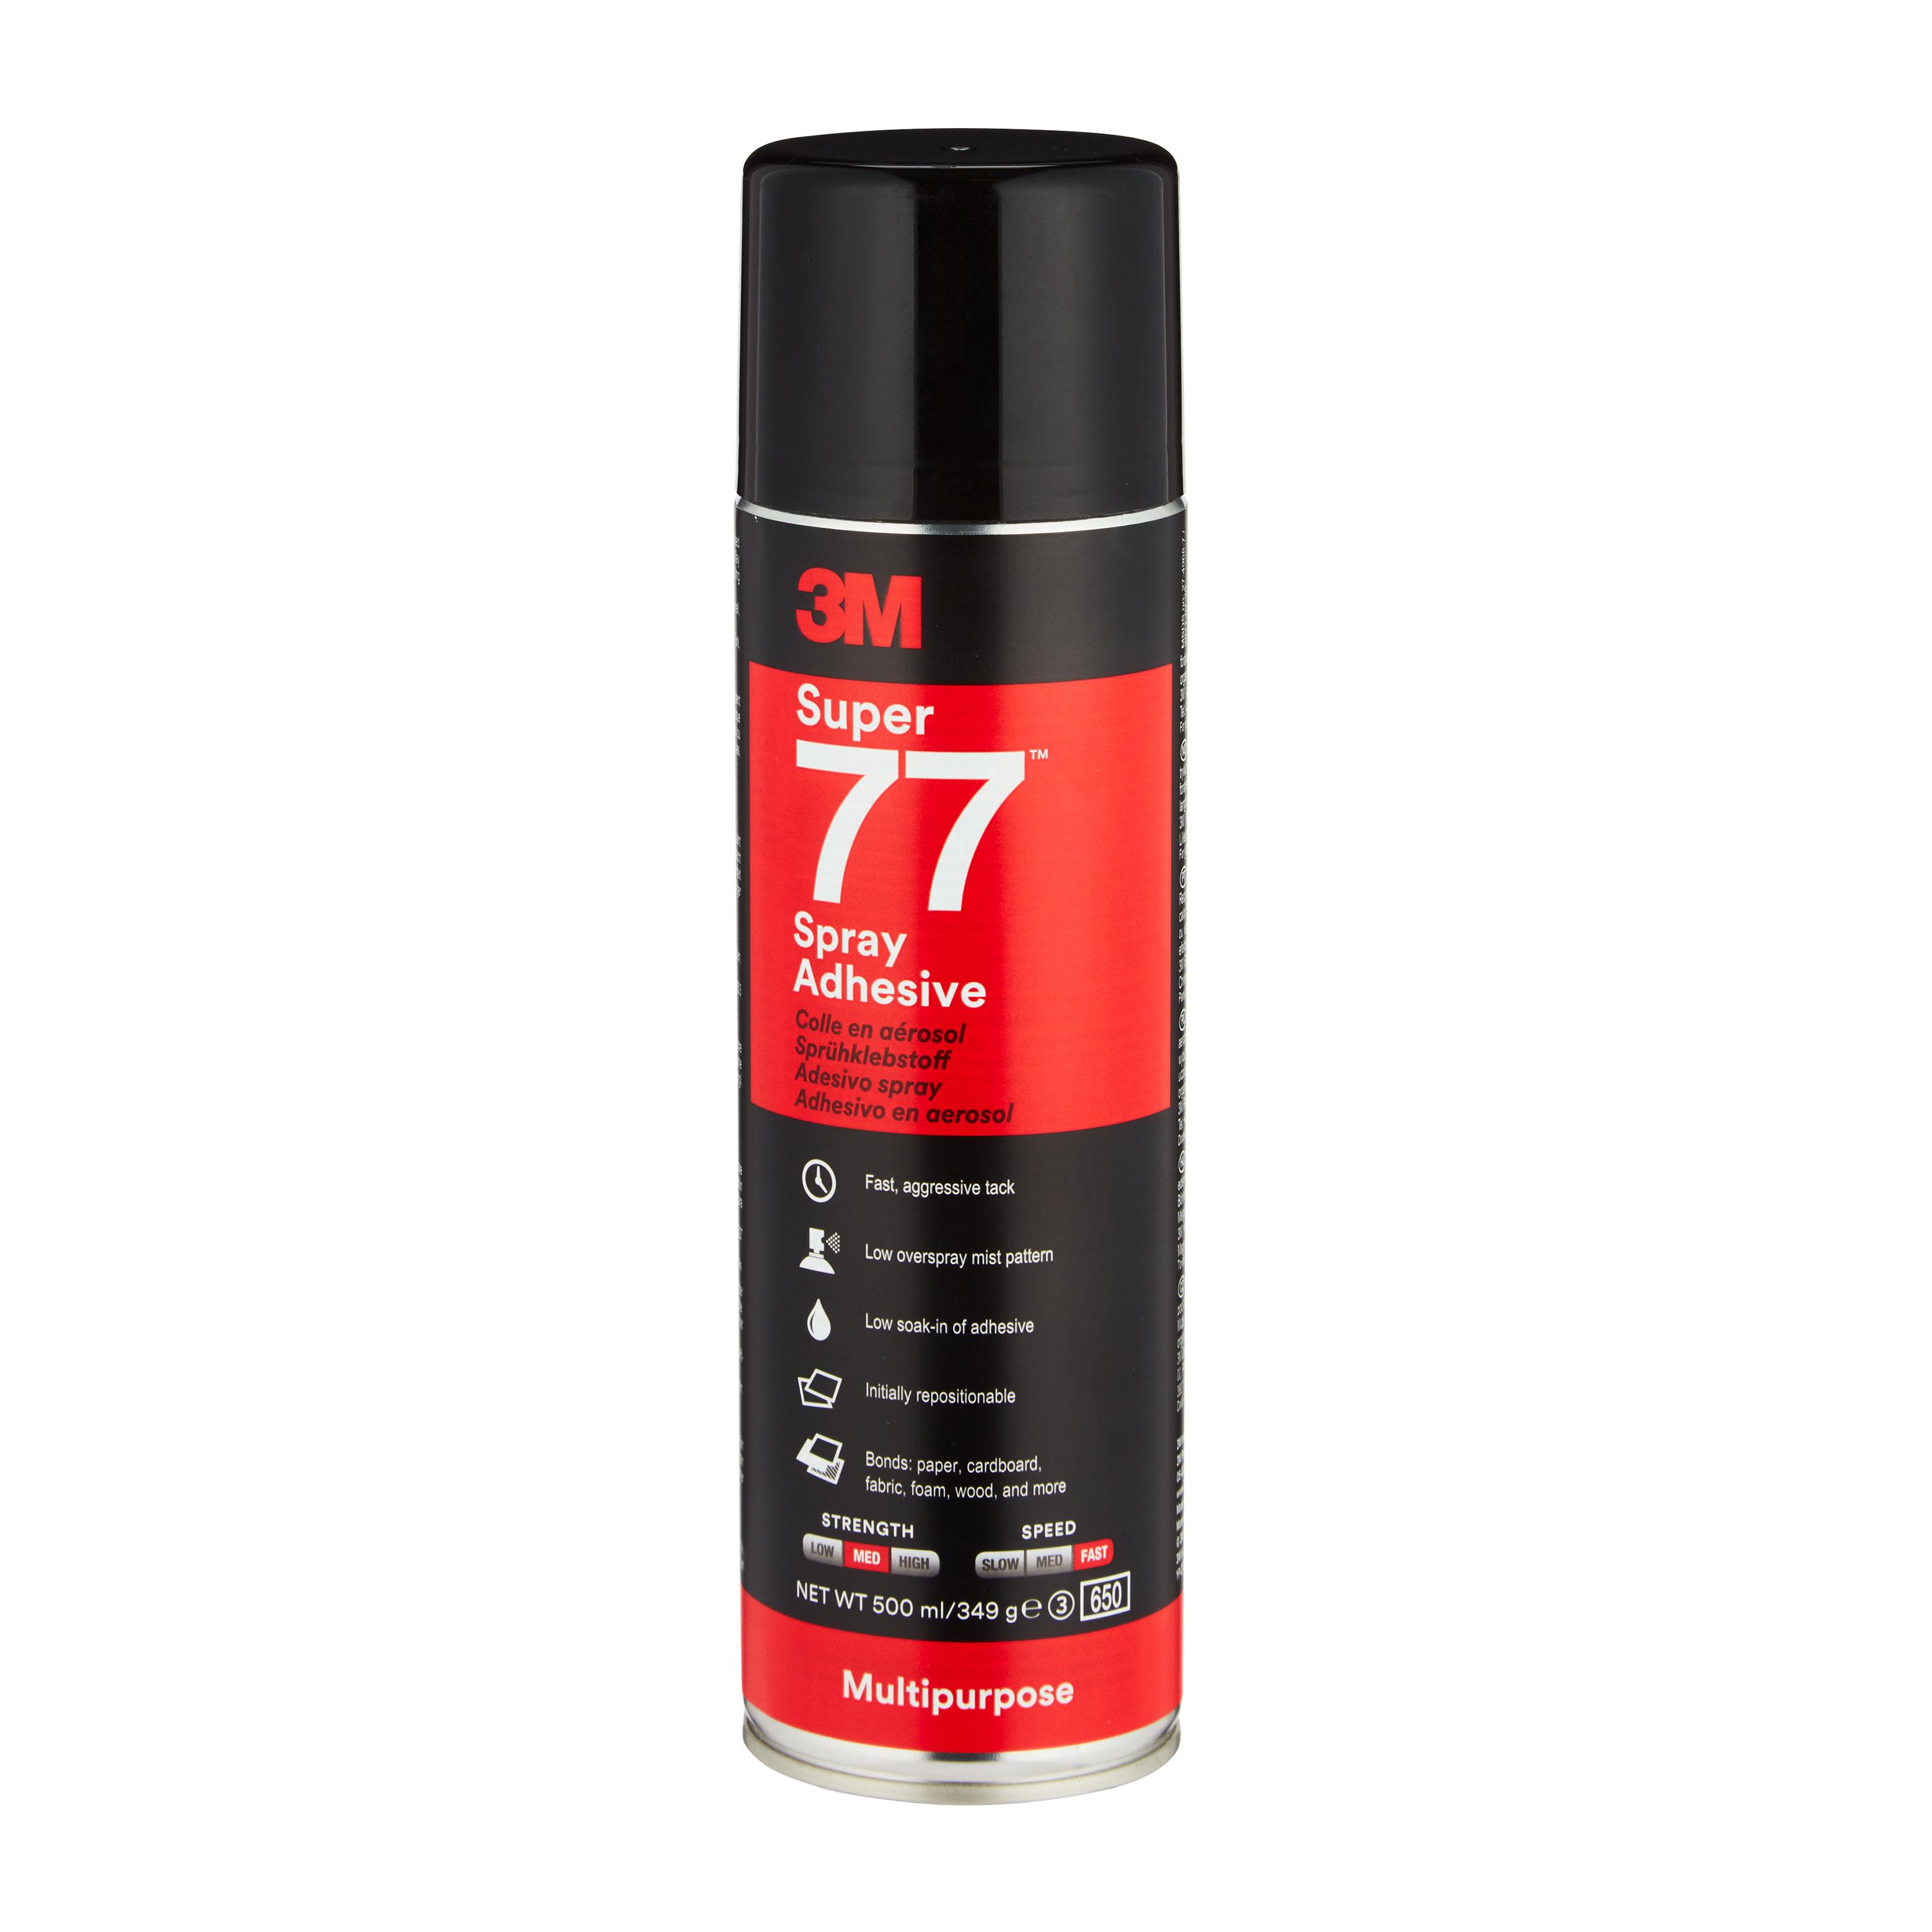 Want an extremely versatile, fast-drying adhessive ? Then 3M's 77 Spray is for you!